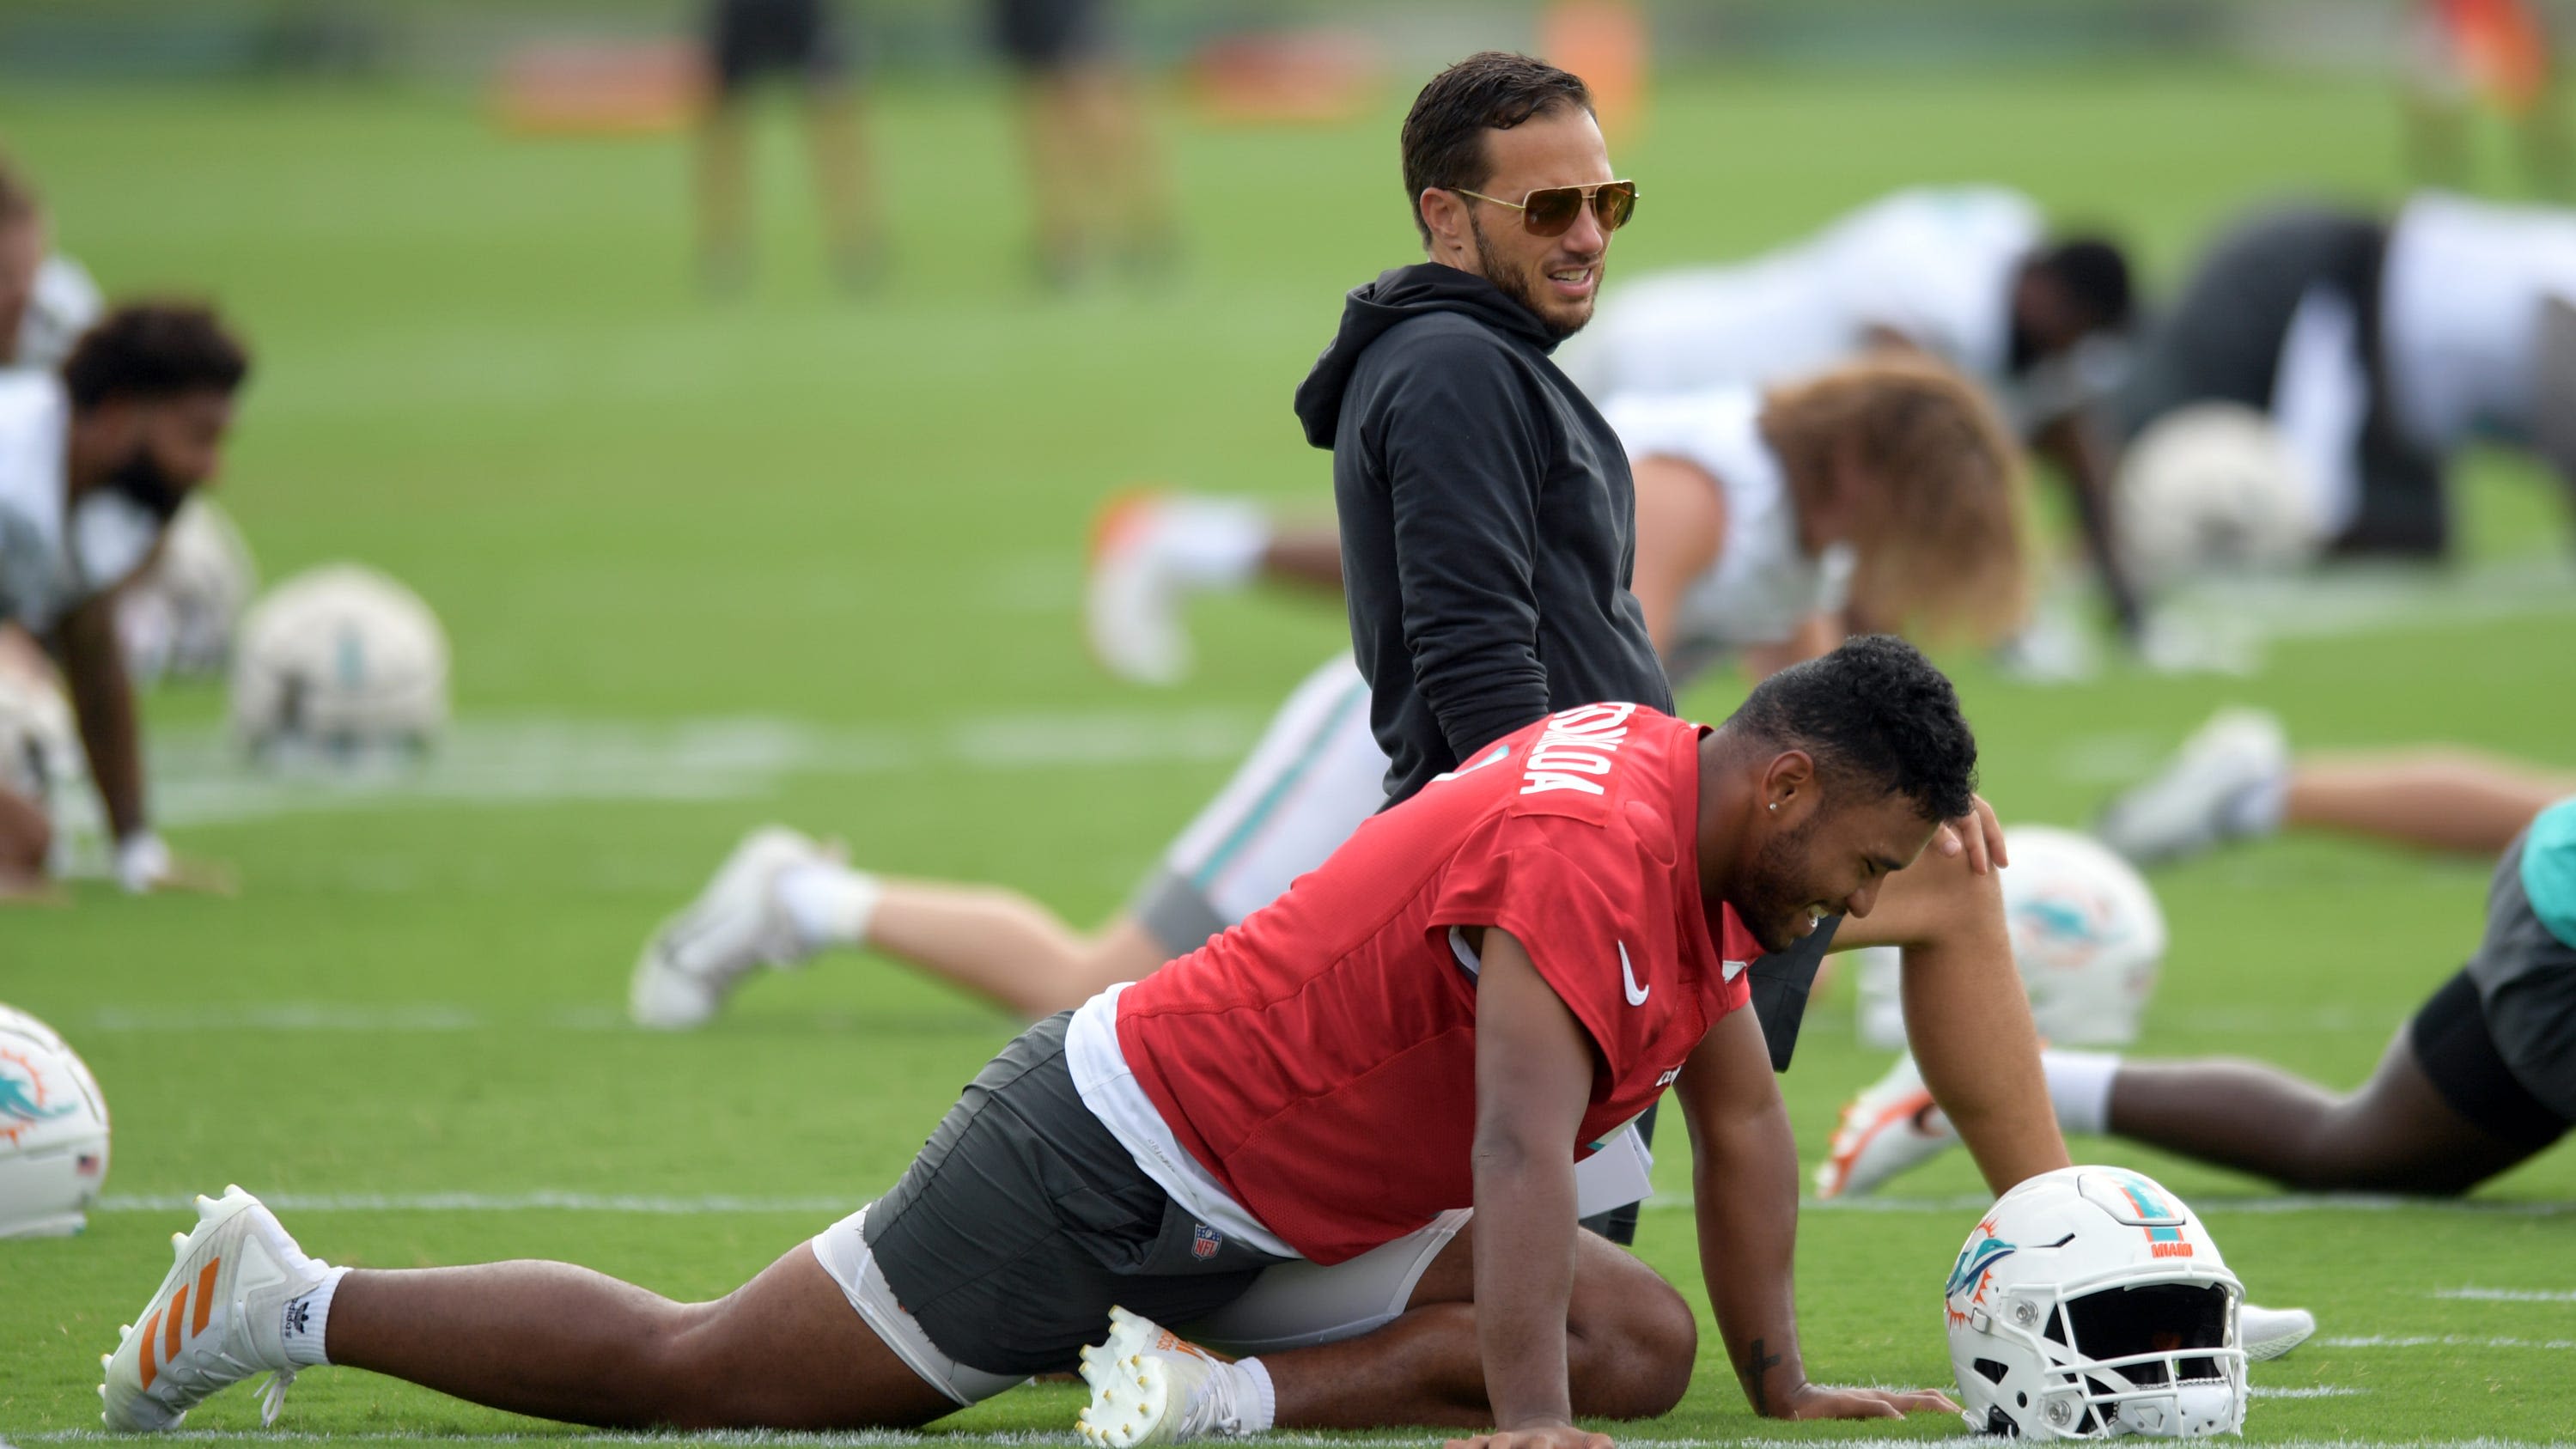 These are the Top 5 Miami Dolphins training camp storylines